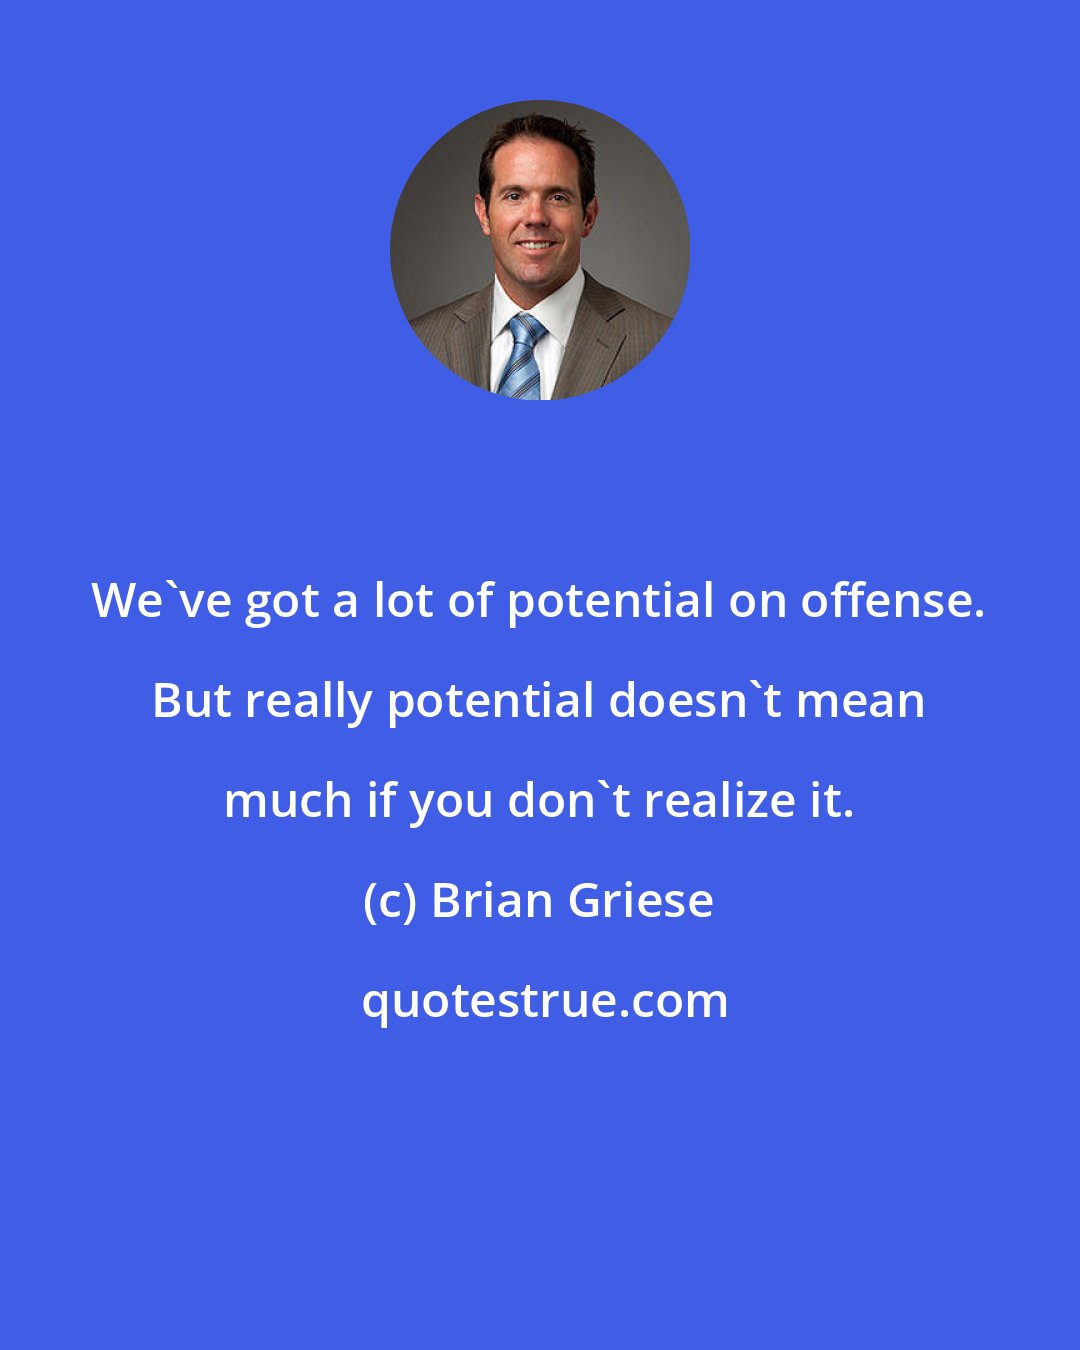 Brian Griese: We've got a lot of potential on offense. But really potential doesn't mean much if you don't realize it.